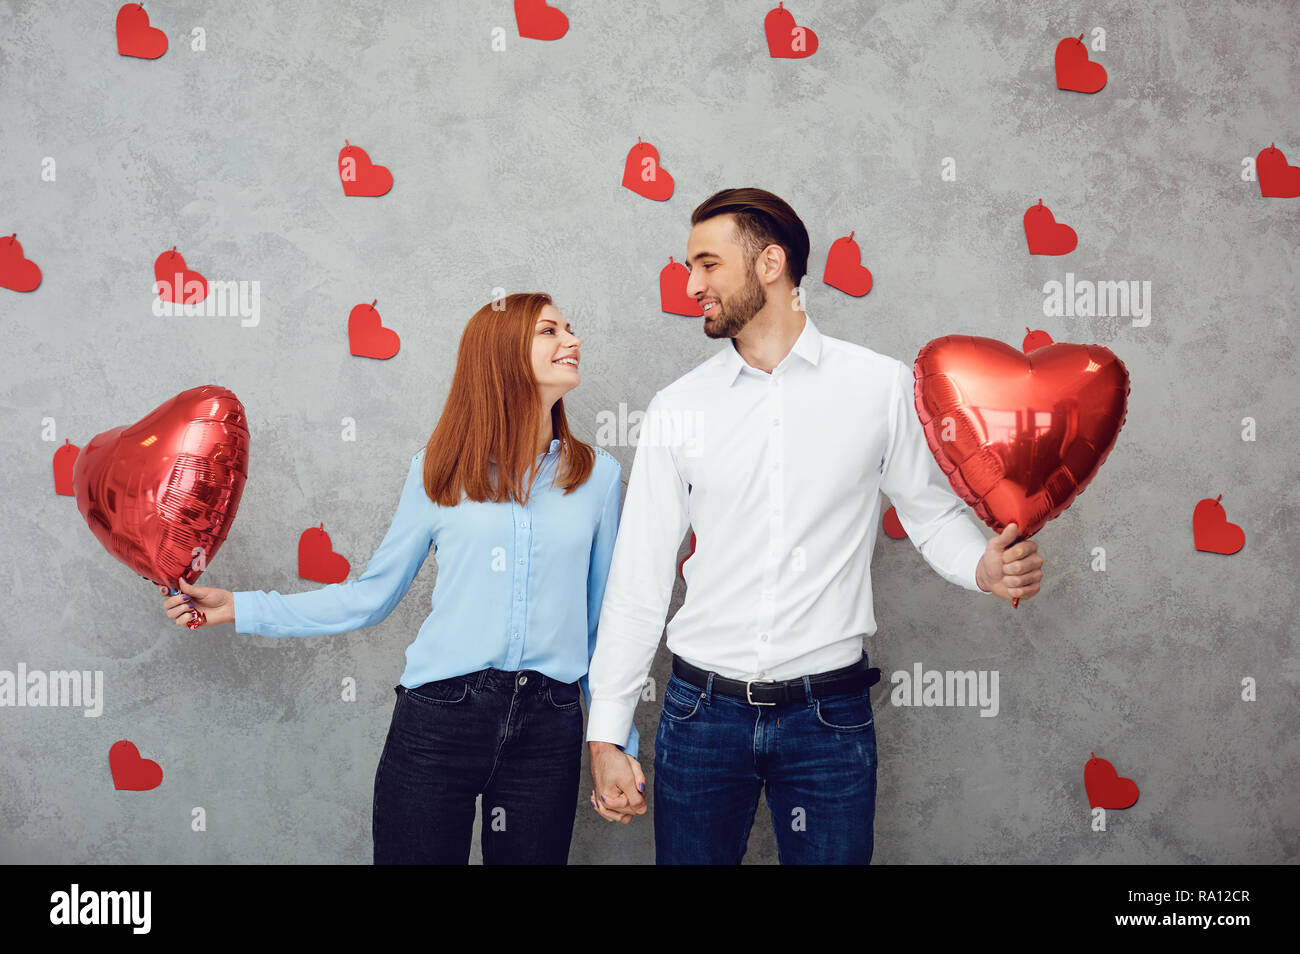 Couple with red heart balloon on a gray background.  Stock Photo